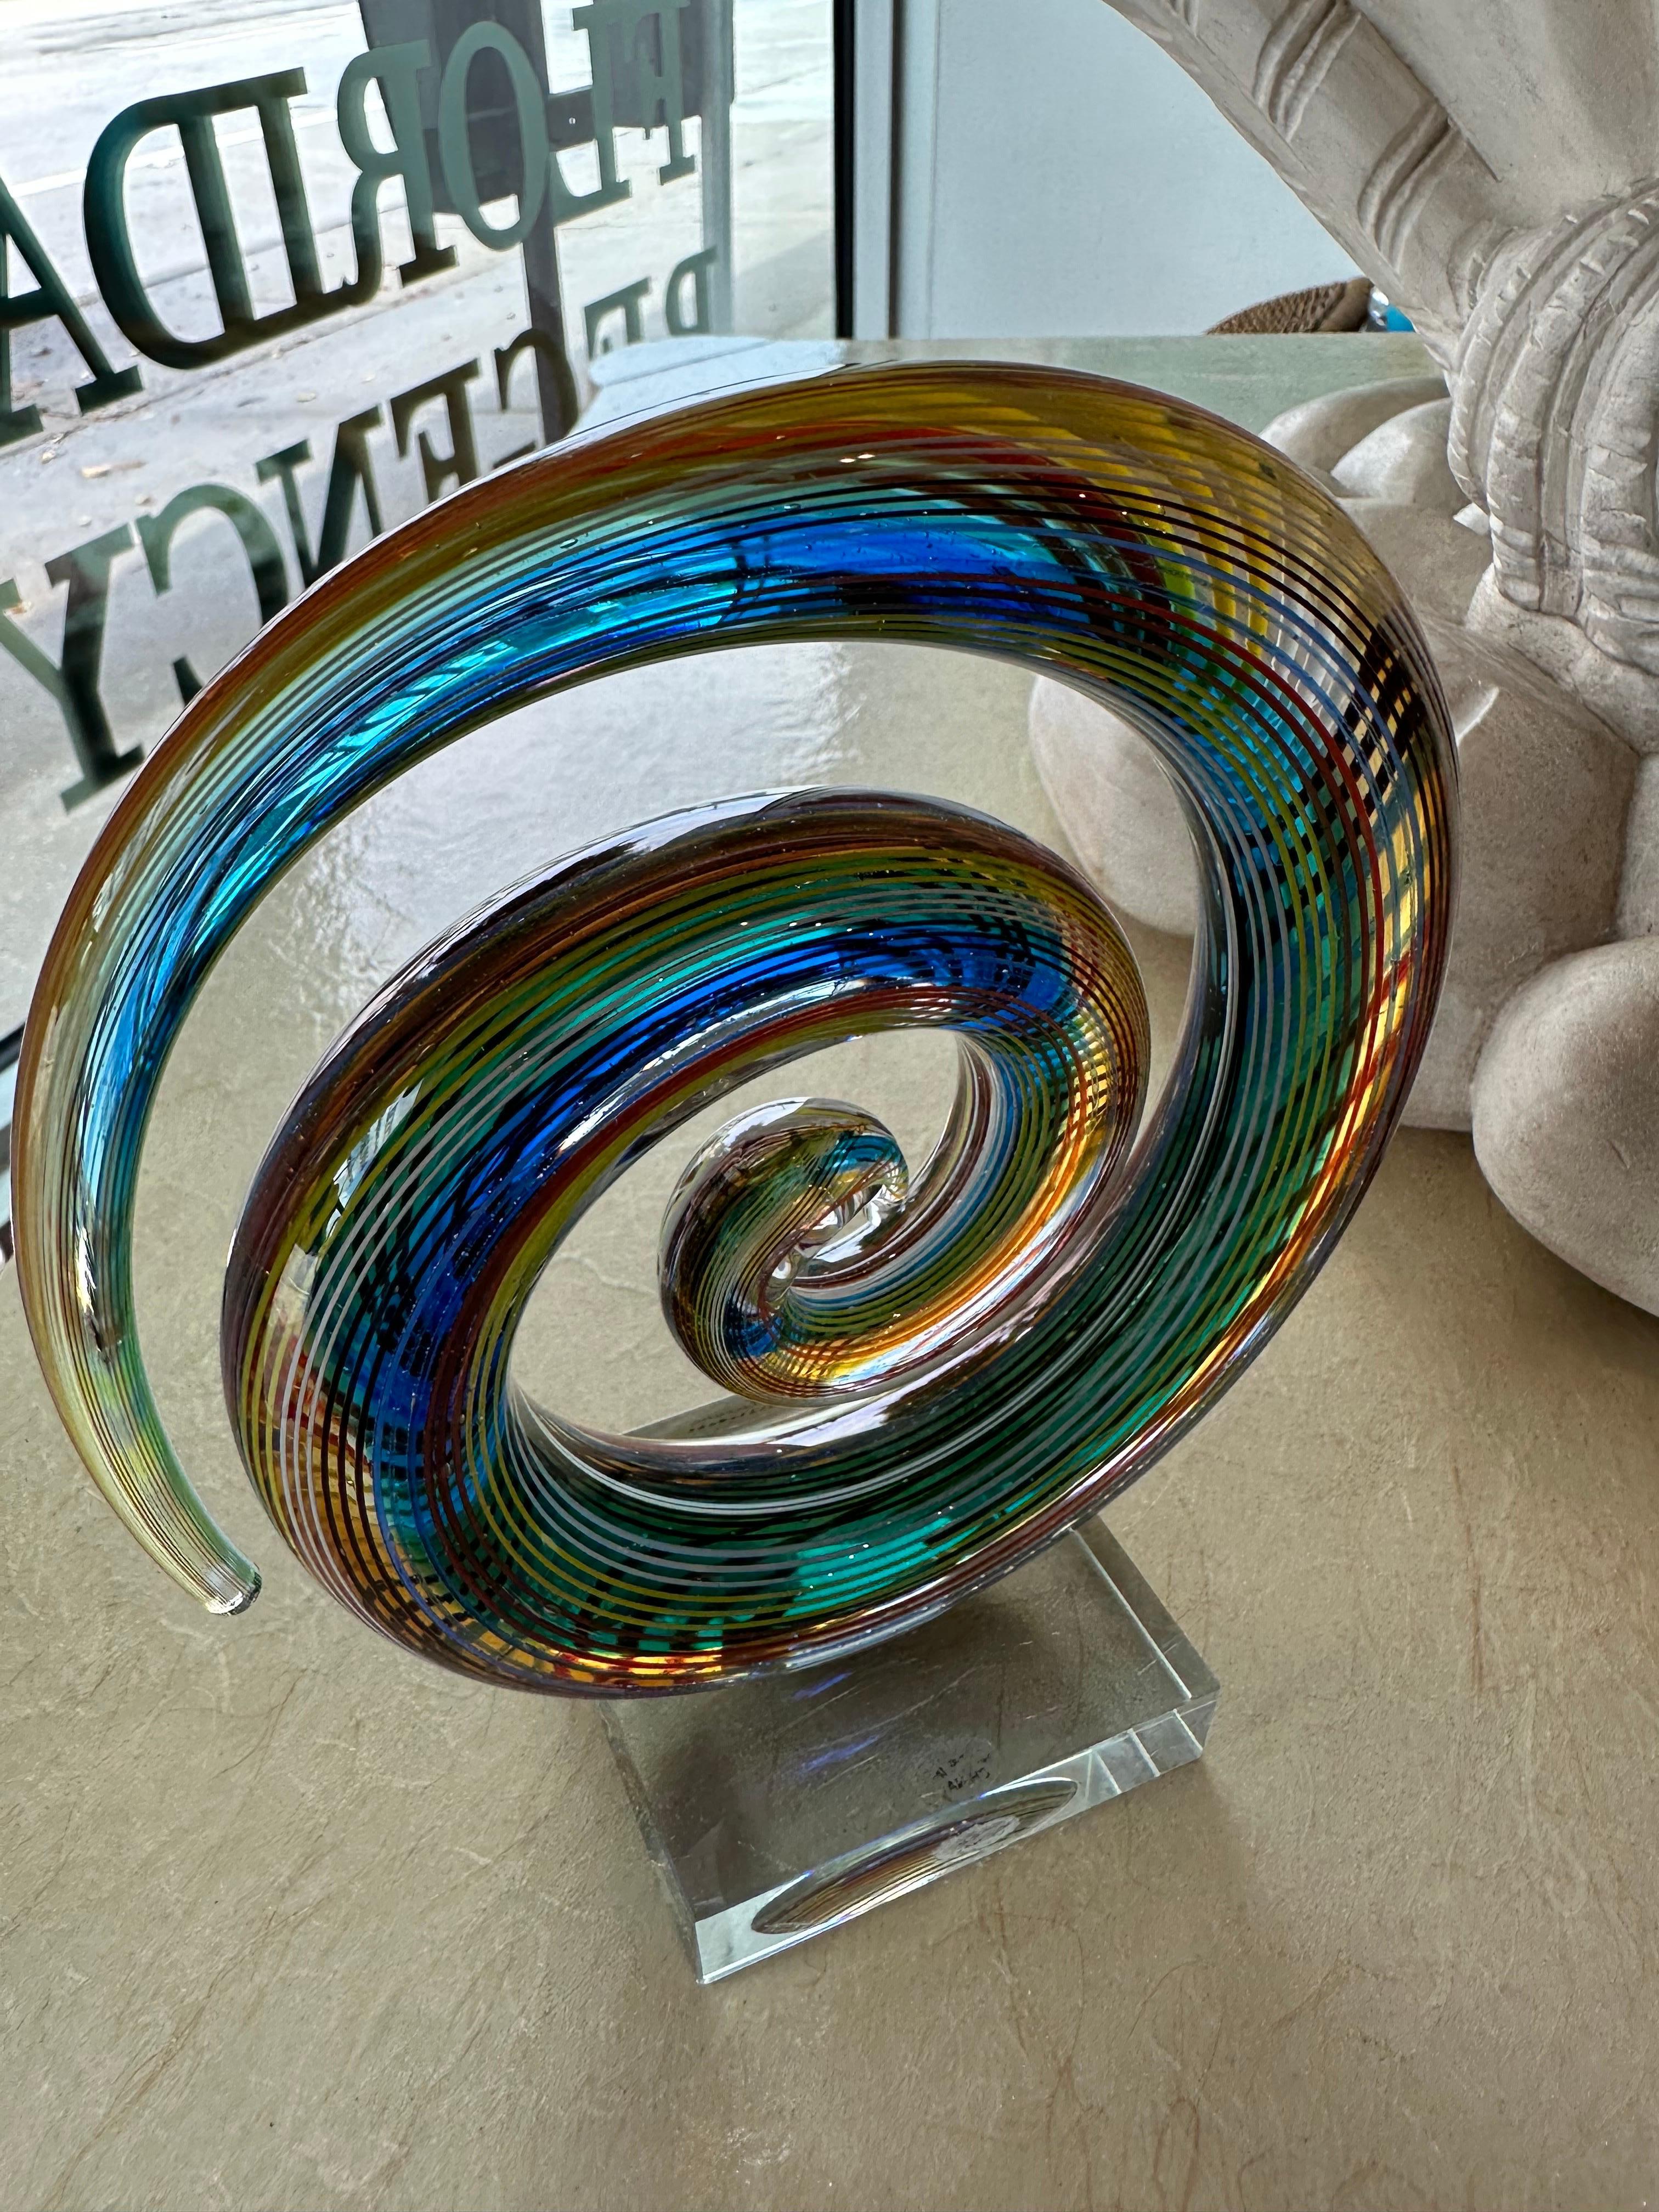 Lovely vintage colorful rainbow glass art sculpture mounted on lucite. Marked Murano. No chips or breaks. Dimensions 8 H x 6.5 W x 3 D.